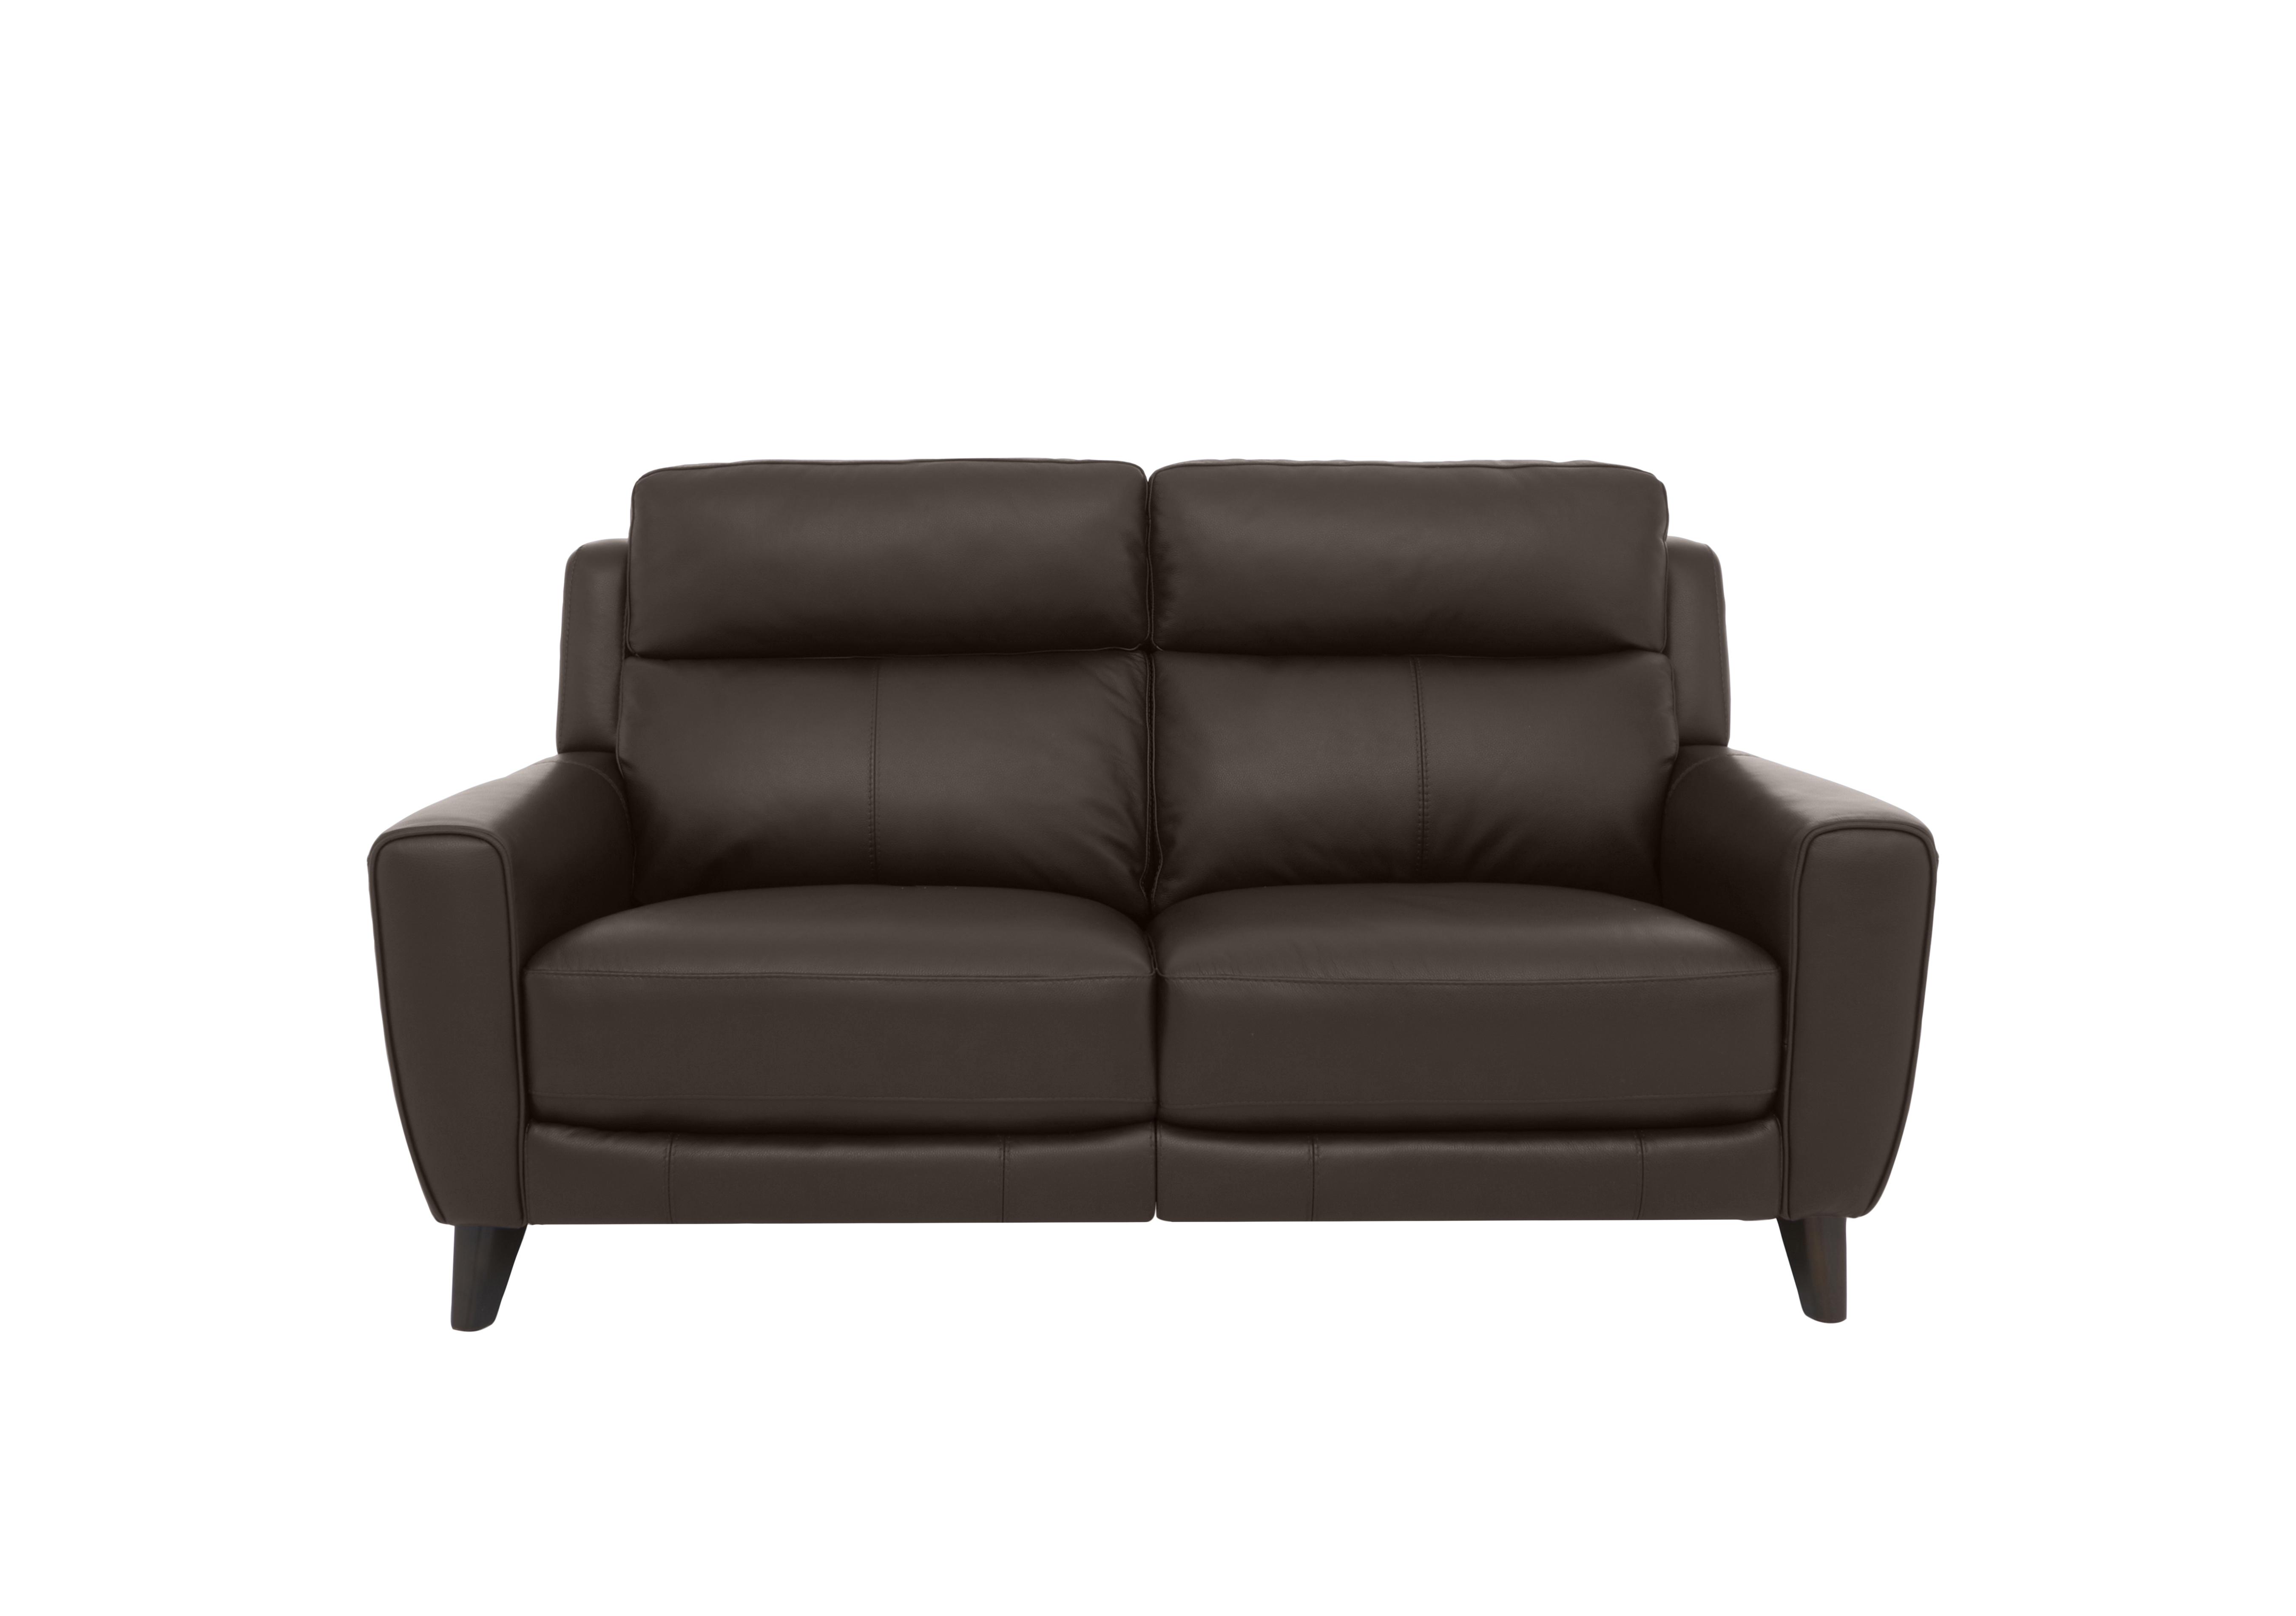 Zen 2 Seater Leather Power Recliner Sofa with Power Headrests and Power Lumbar in Bx-037c Walnut on Furniture Village